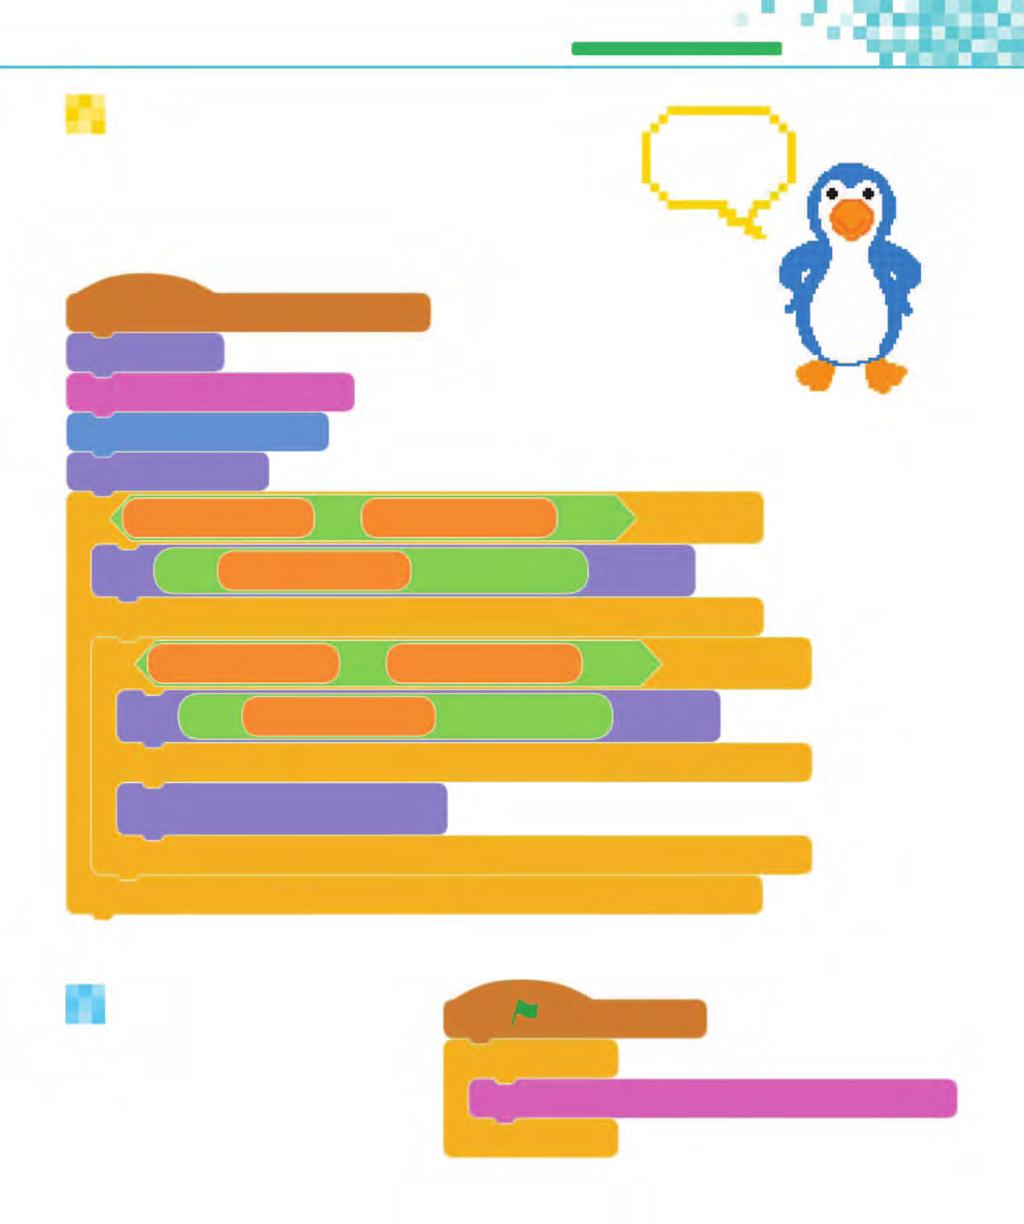 GAME PROGRESS 100% 185 37 To make the penguin announce the winner, add the next script. This script has one else block inside another.